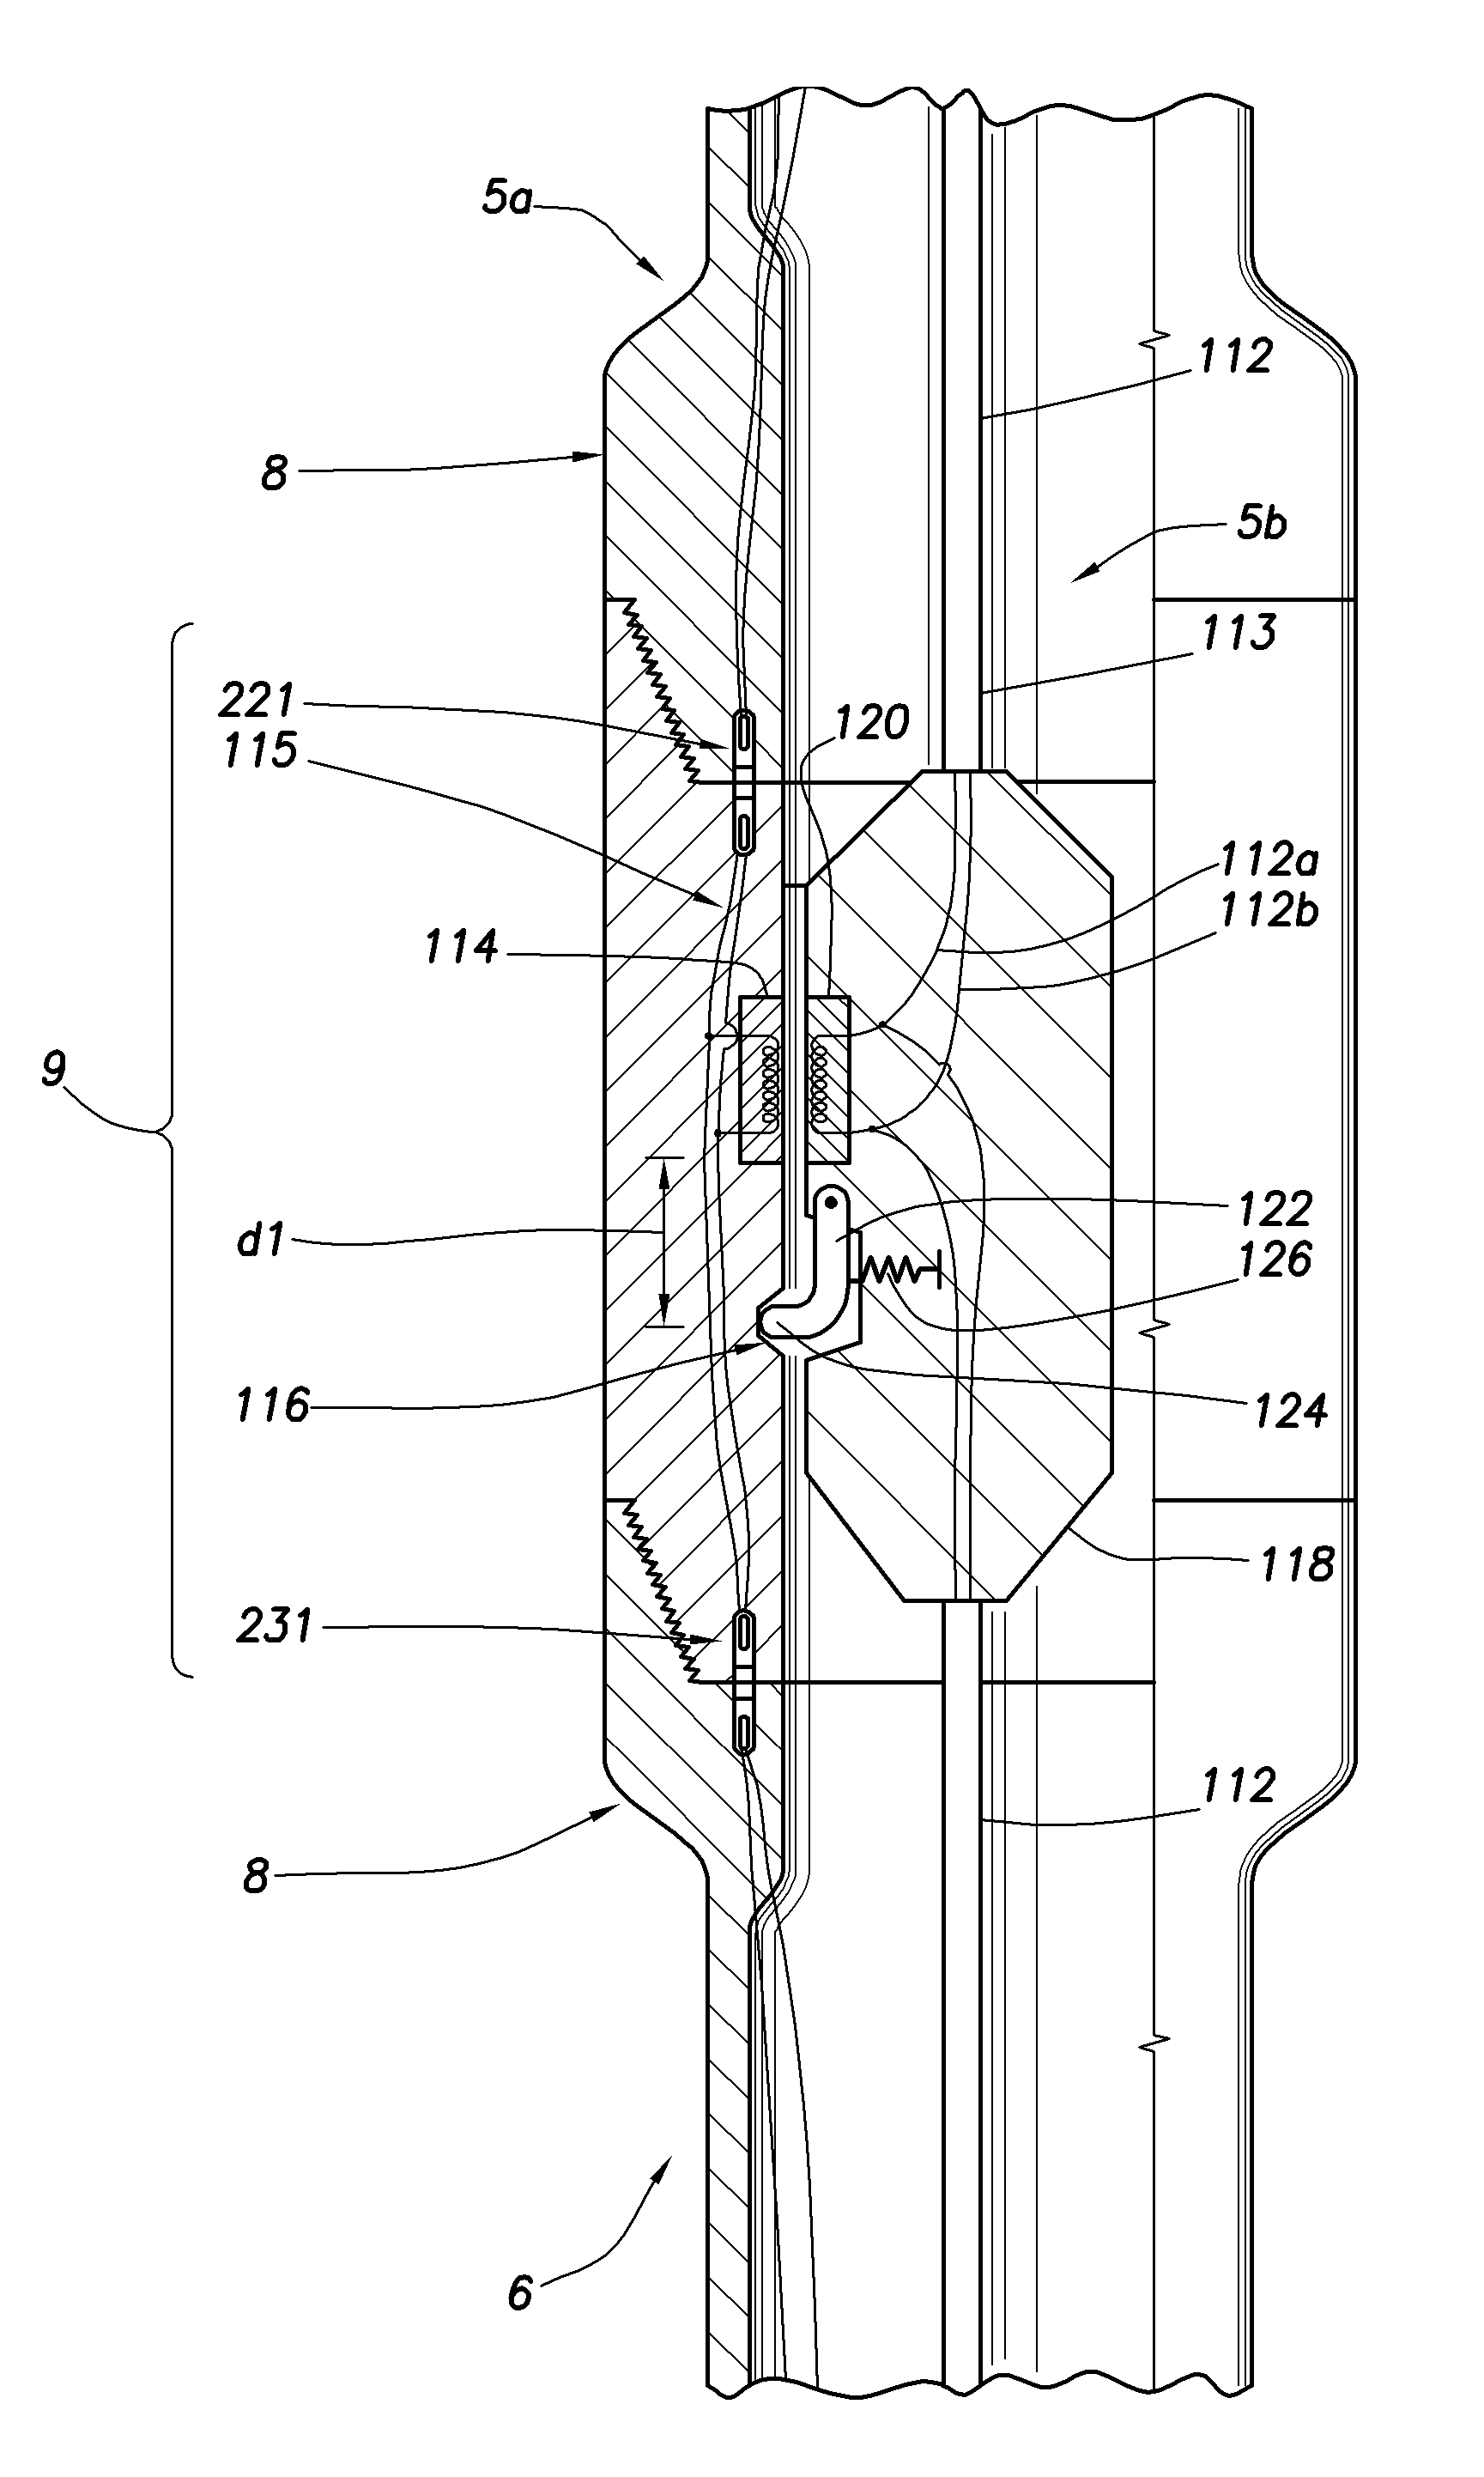 Downhole telemetry system and method